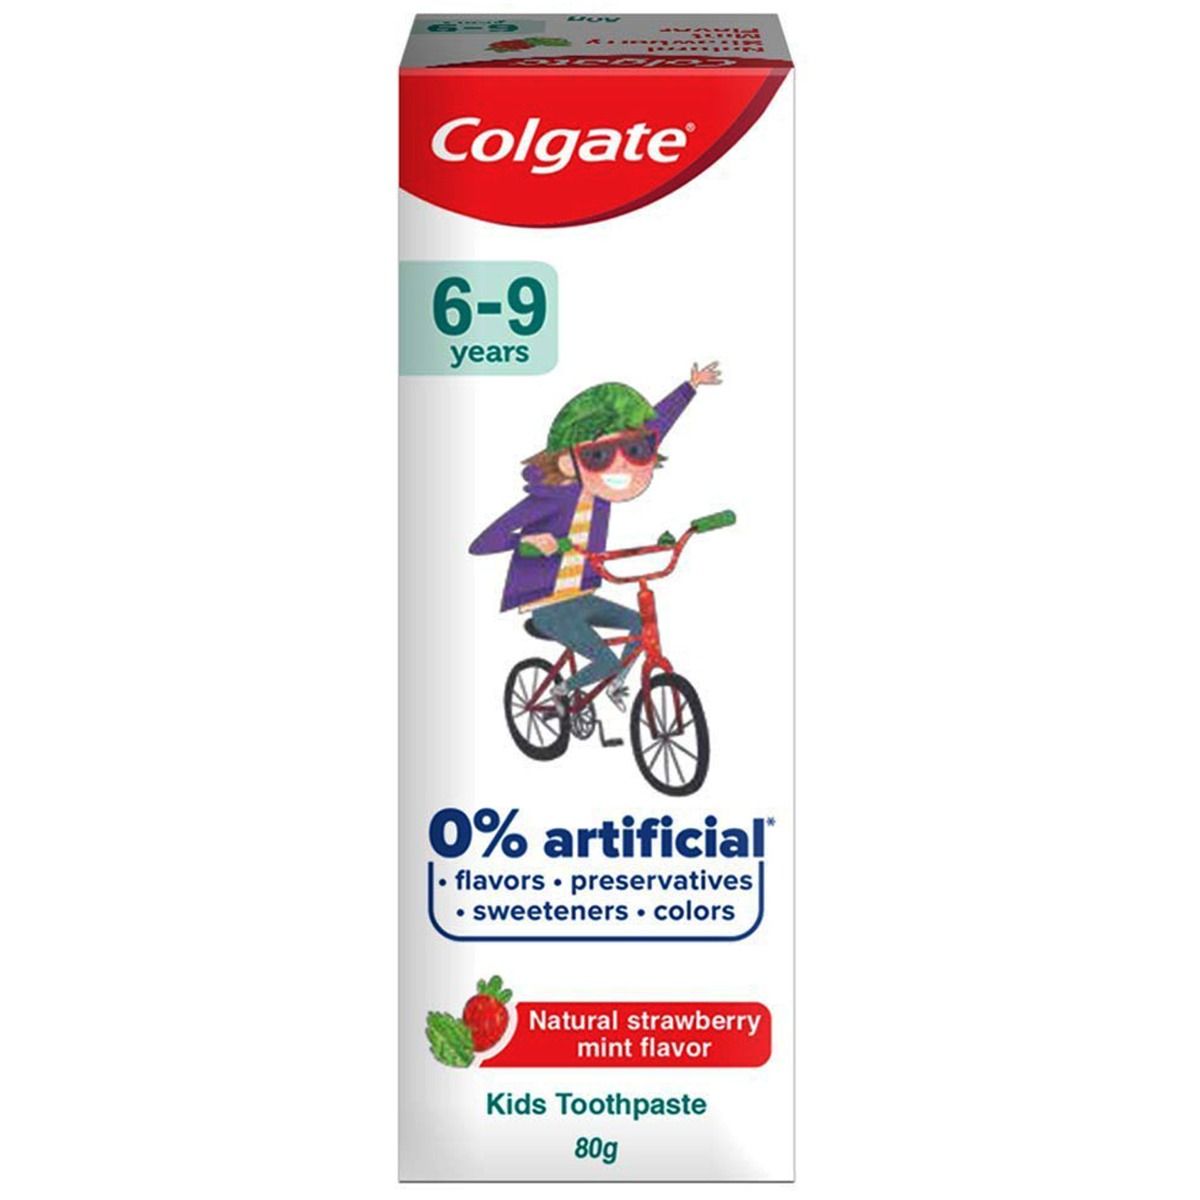 Colgate Toothpaste for Kids (6-9 years), Natural Strawberry Mint Flavour 80 gm, Pack of 1 